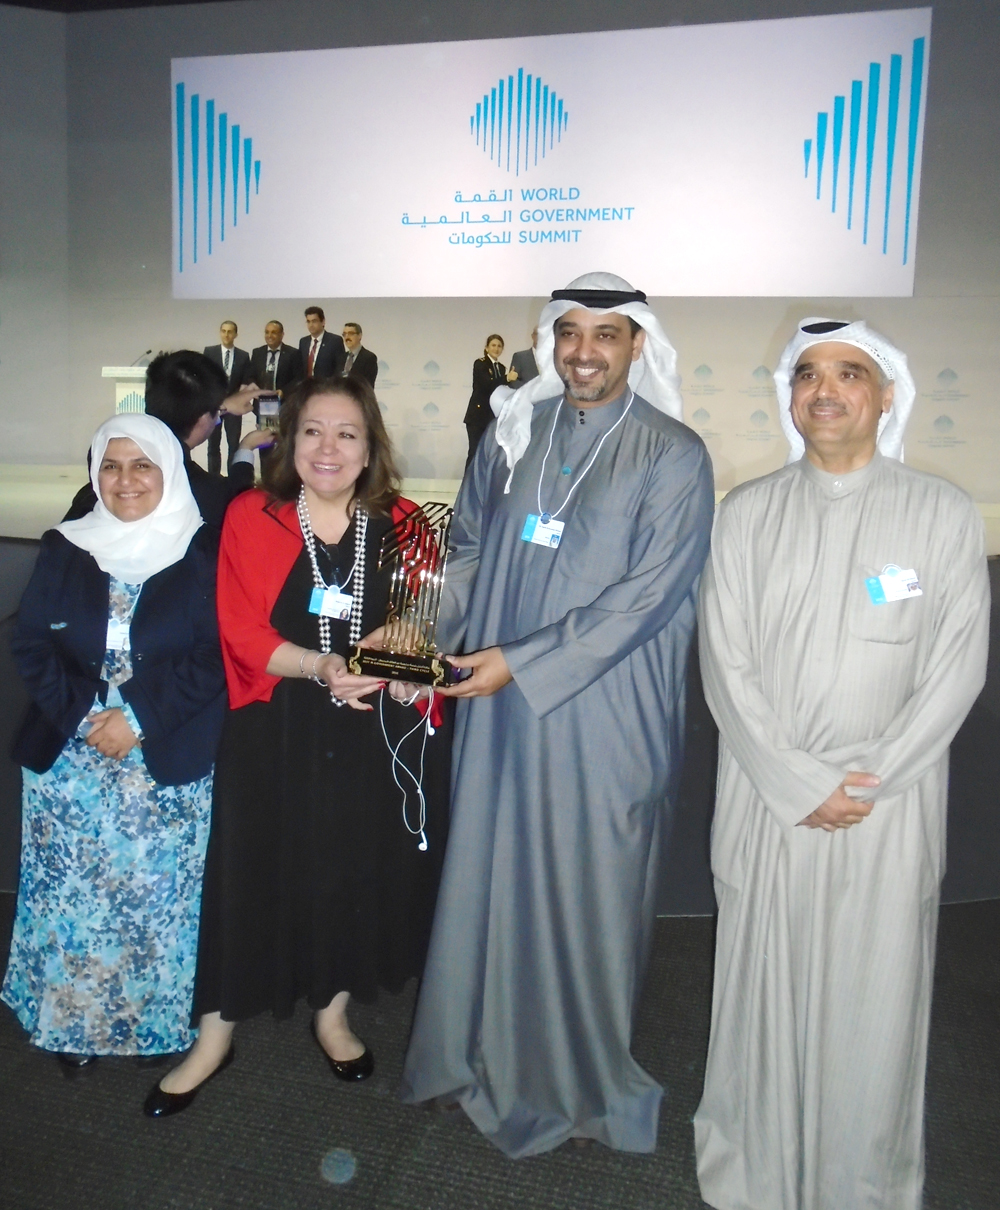 Acting Minister of Electricity and Water Sheikh Mohammad Al-Abdullah Al-Mubarak Al-Sabah Receives award for electronic services